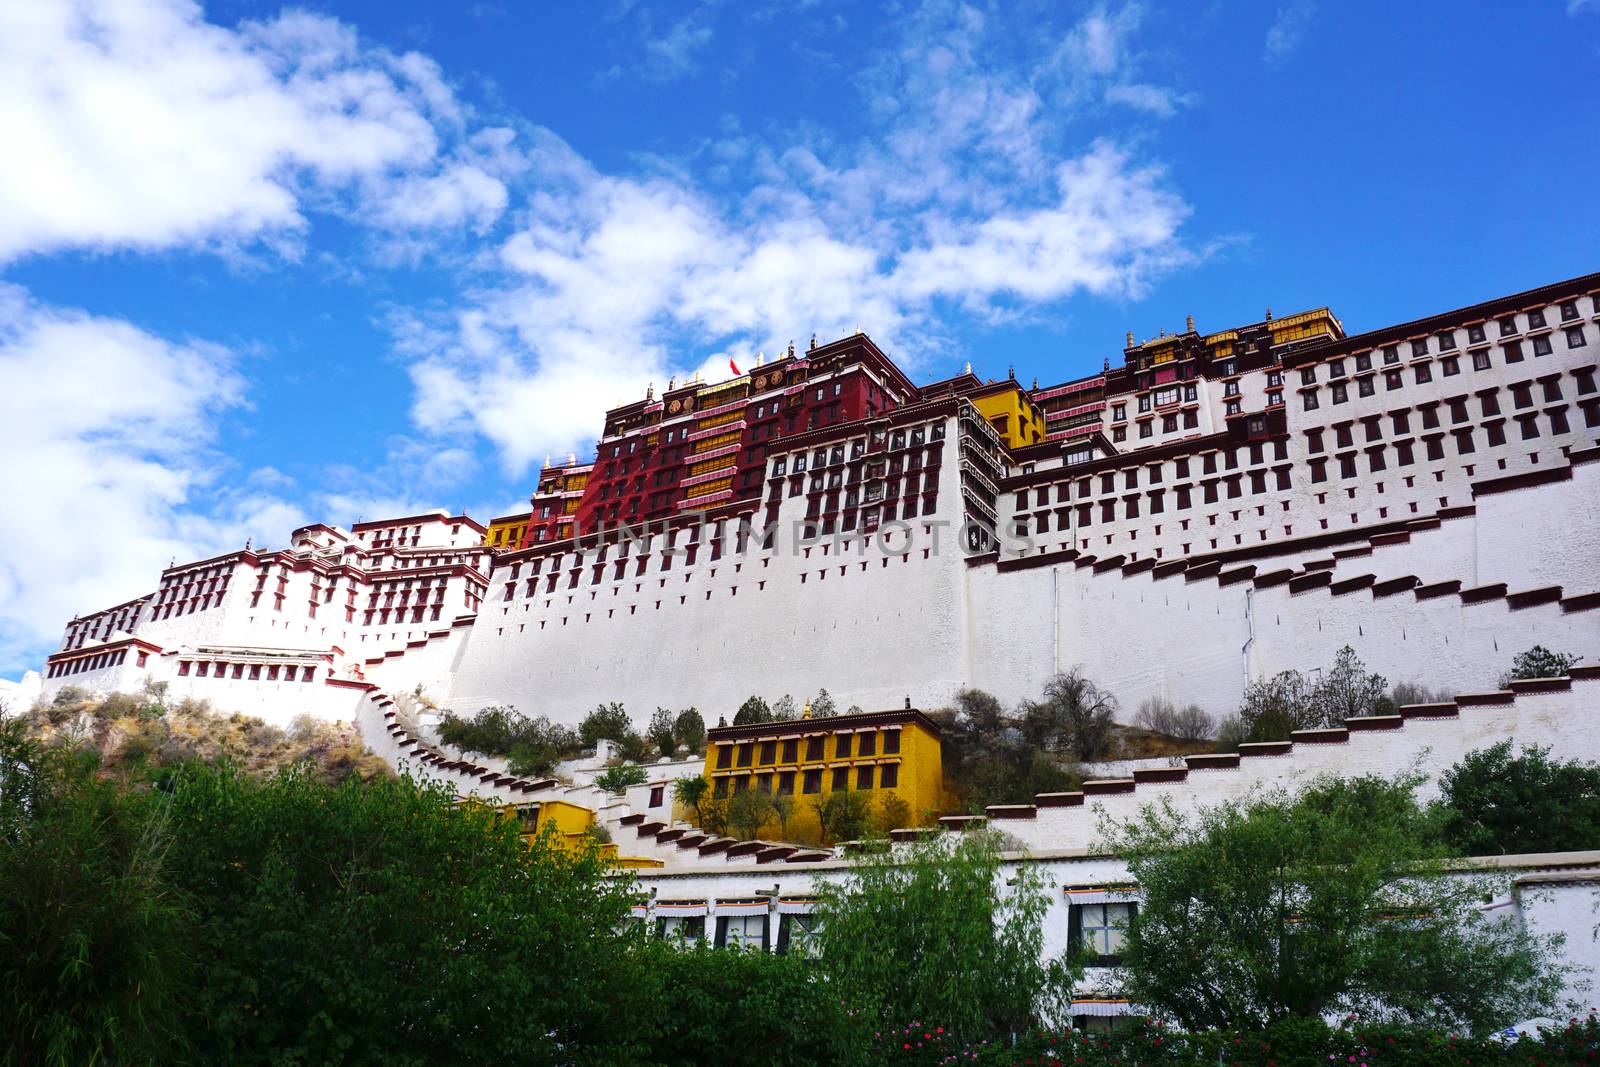 Potala palace in Lhasa by yongtick